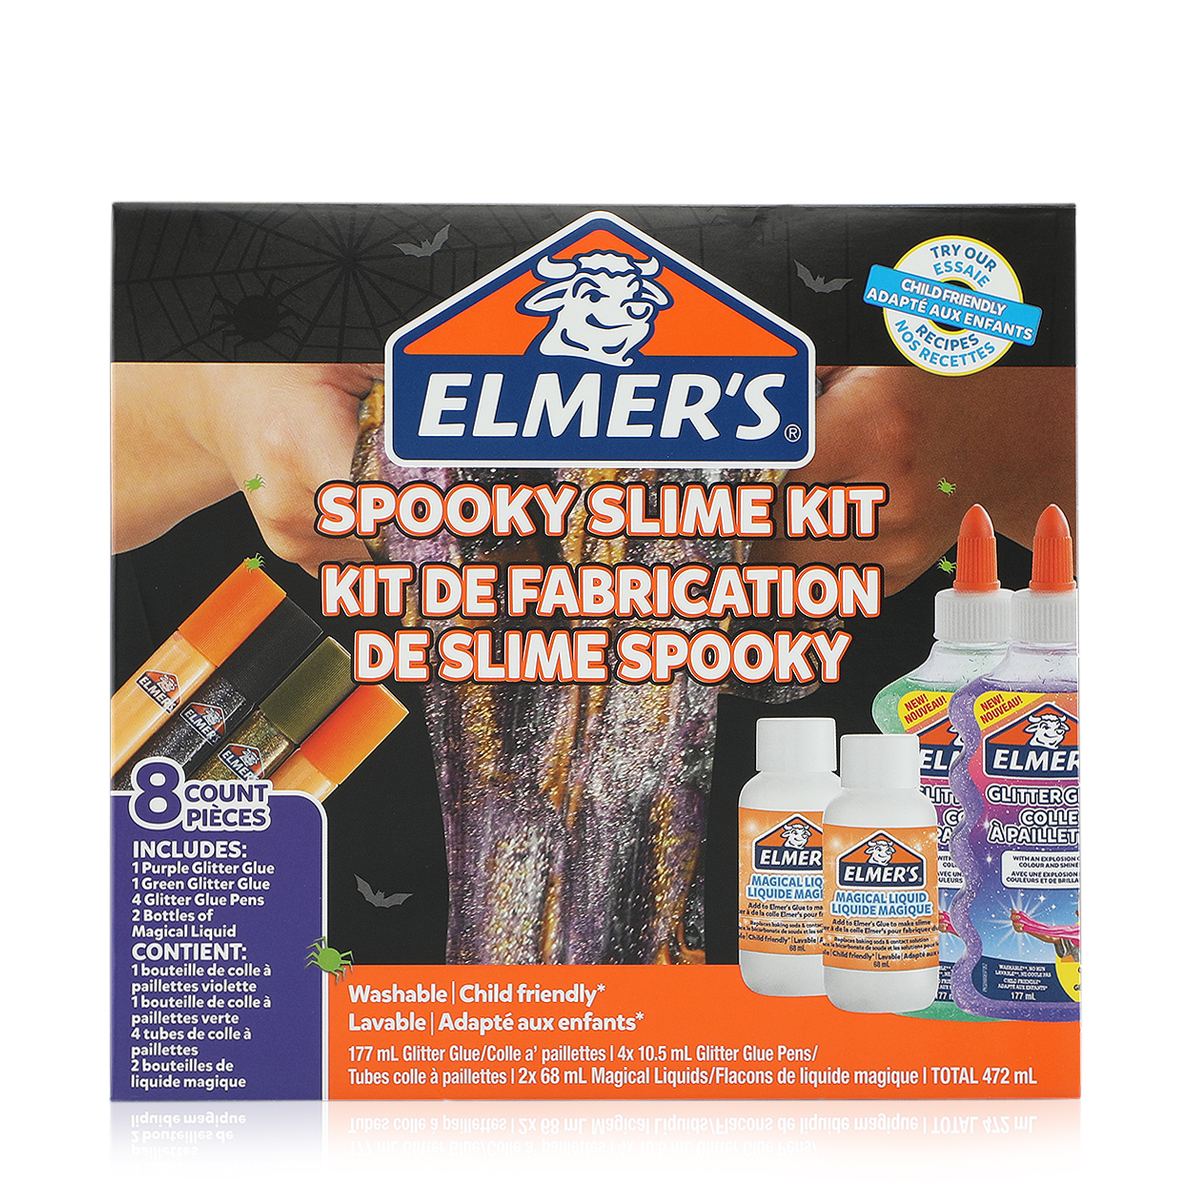 Elmers Glue Slime Kit Spooky 8 pieces - buy at